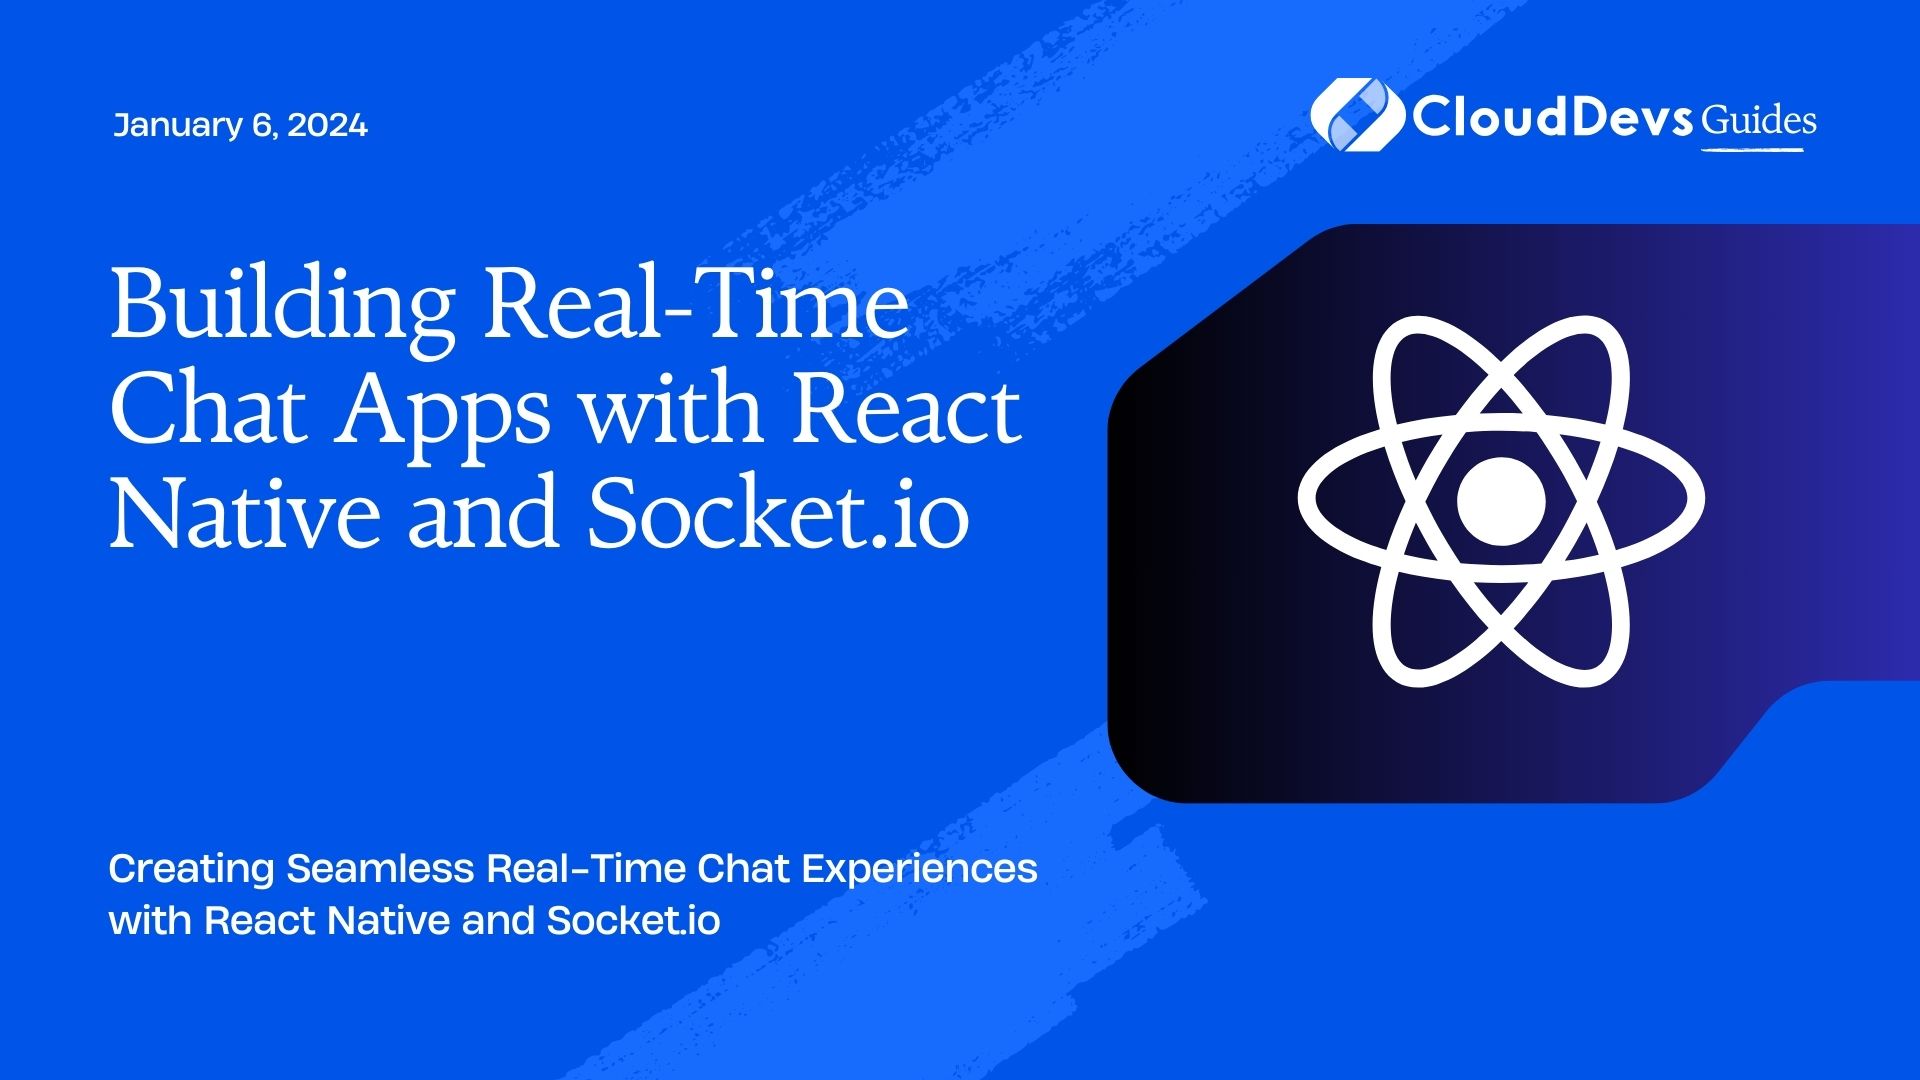 Building Real-Time Chat Apps with React Native and Socket.io